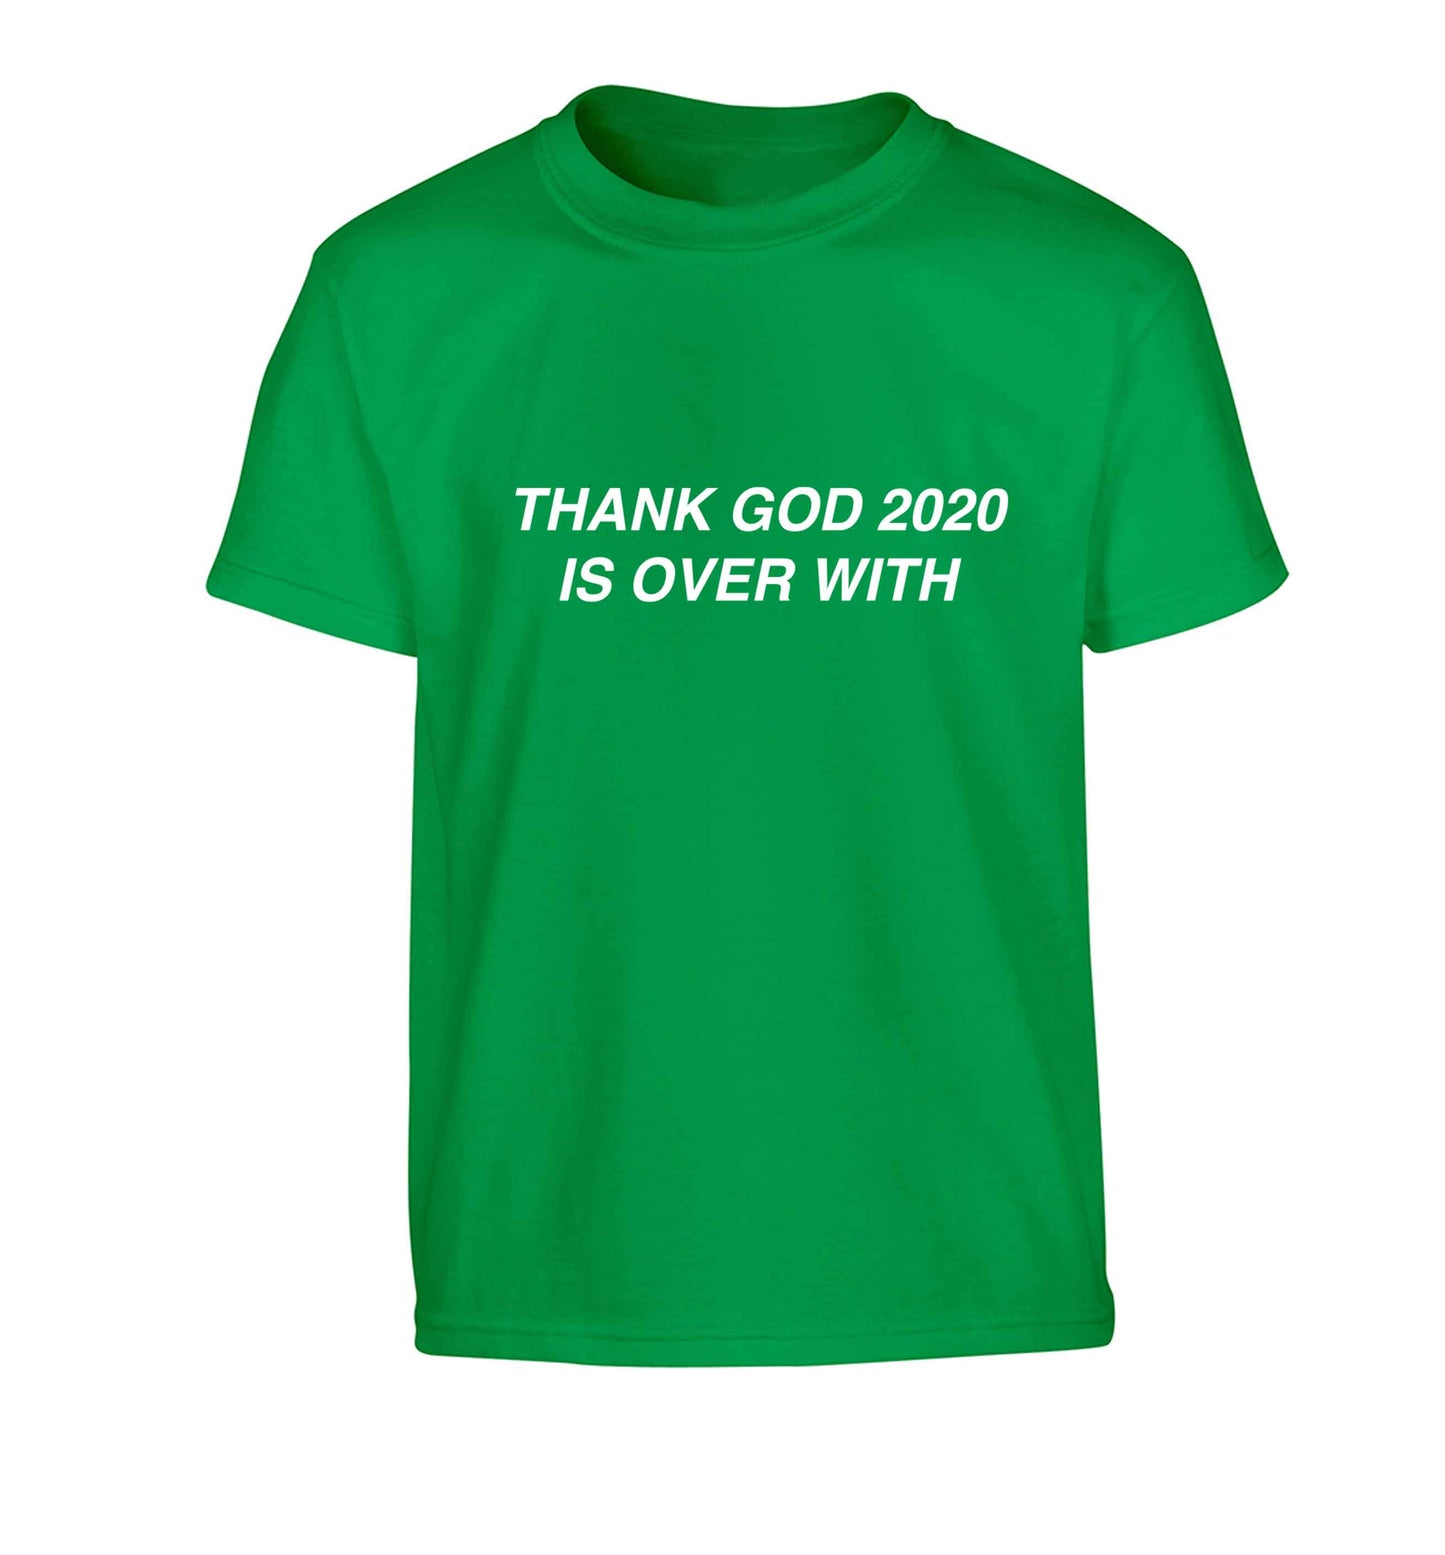 Thank god 2020 is over with Children's green Tshirt 12-13 Years